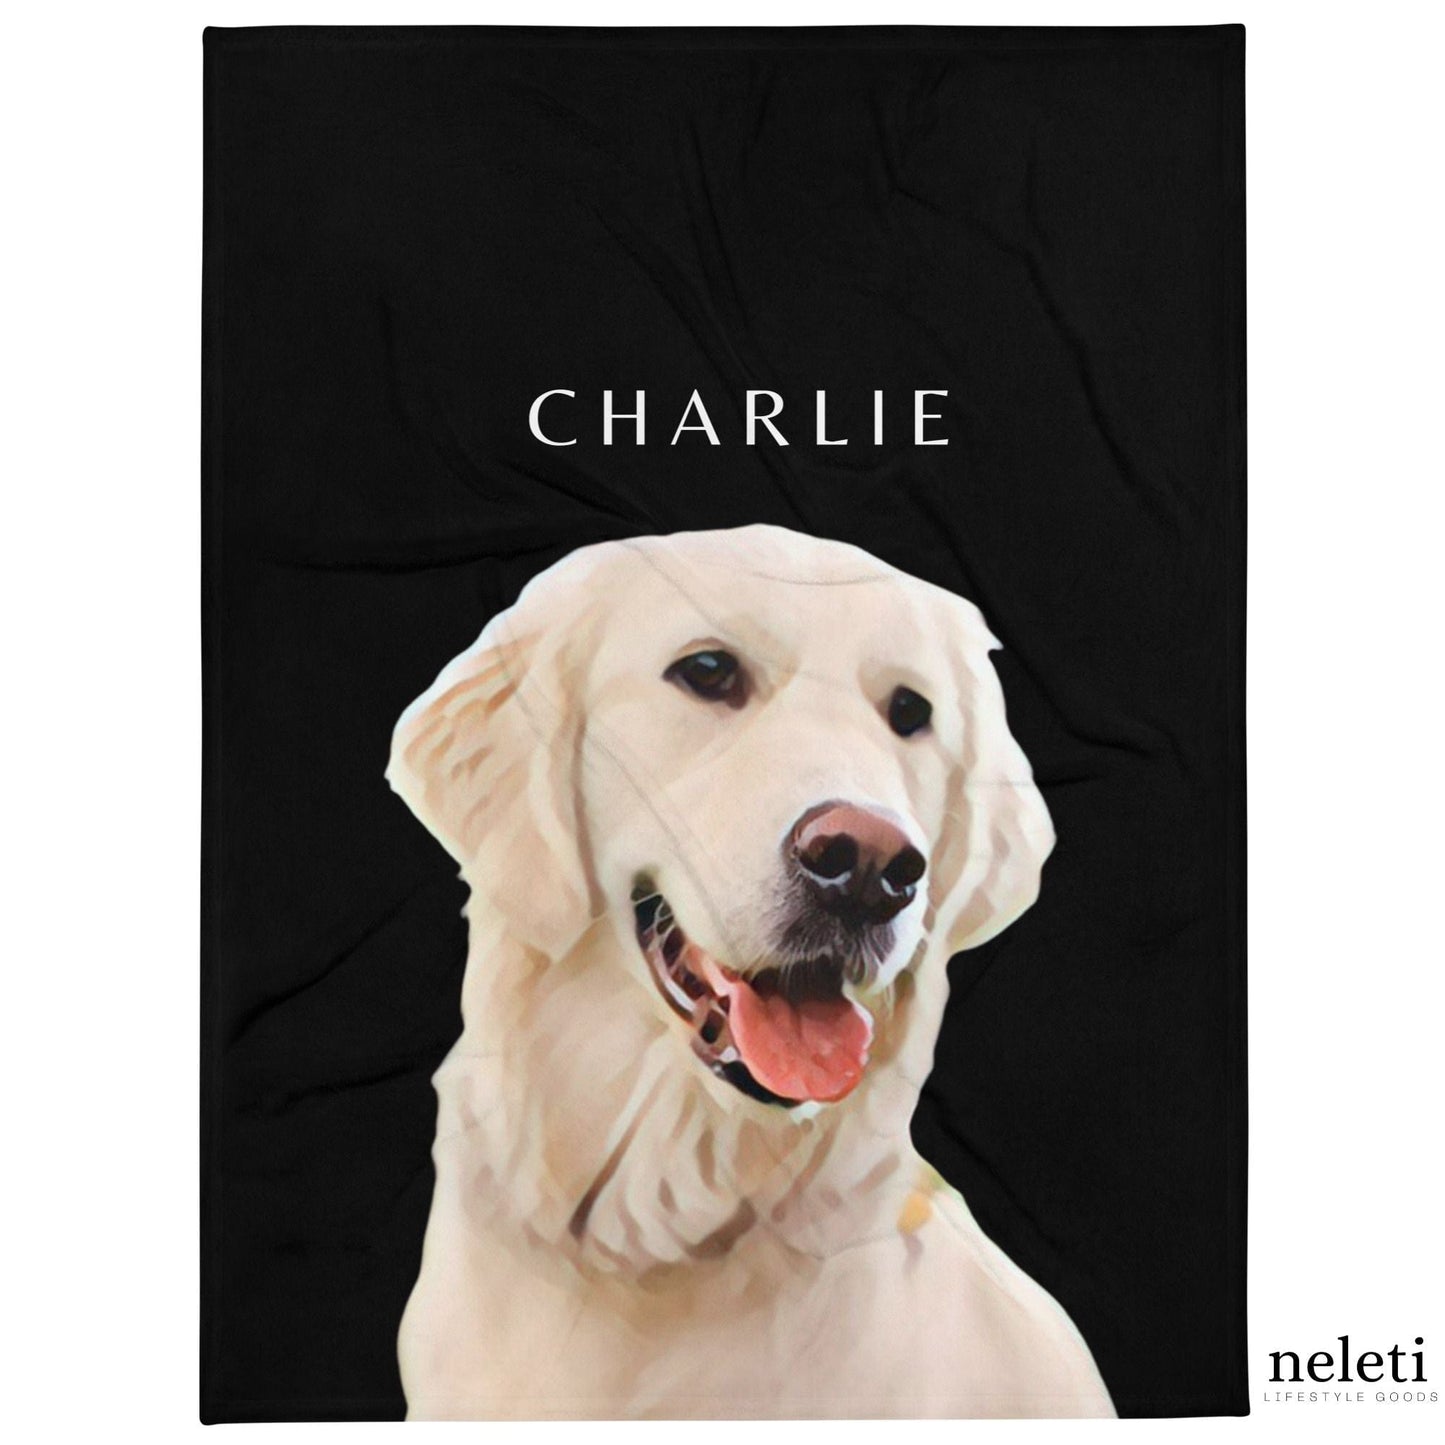 neleti Personalized Blanket with Pet from Photo - Dog Themed Gift